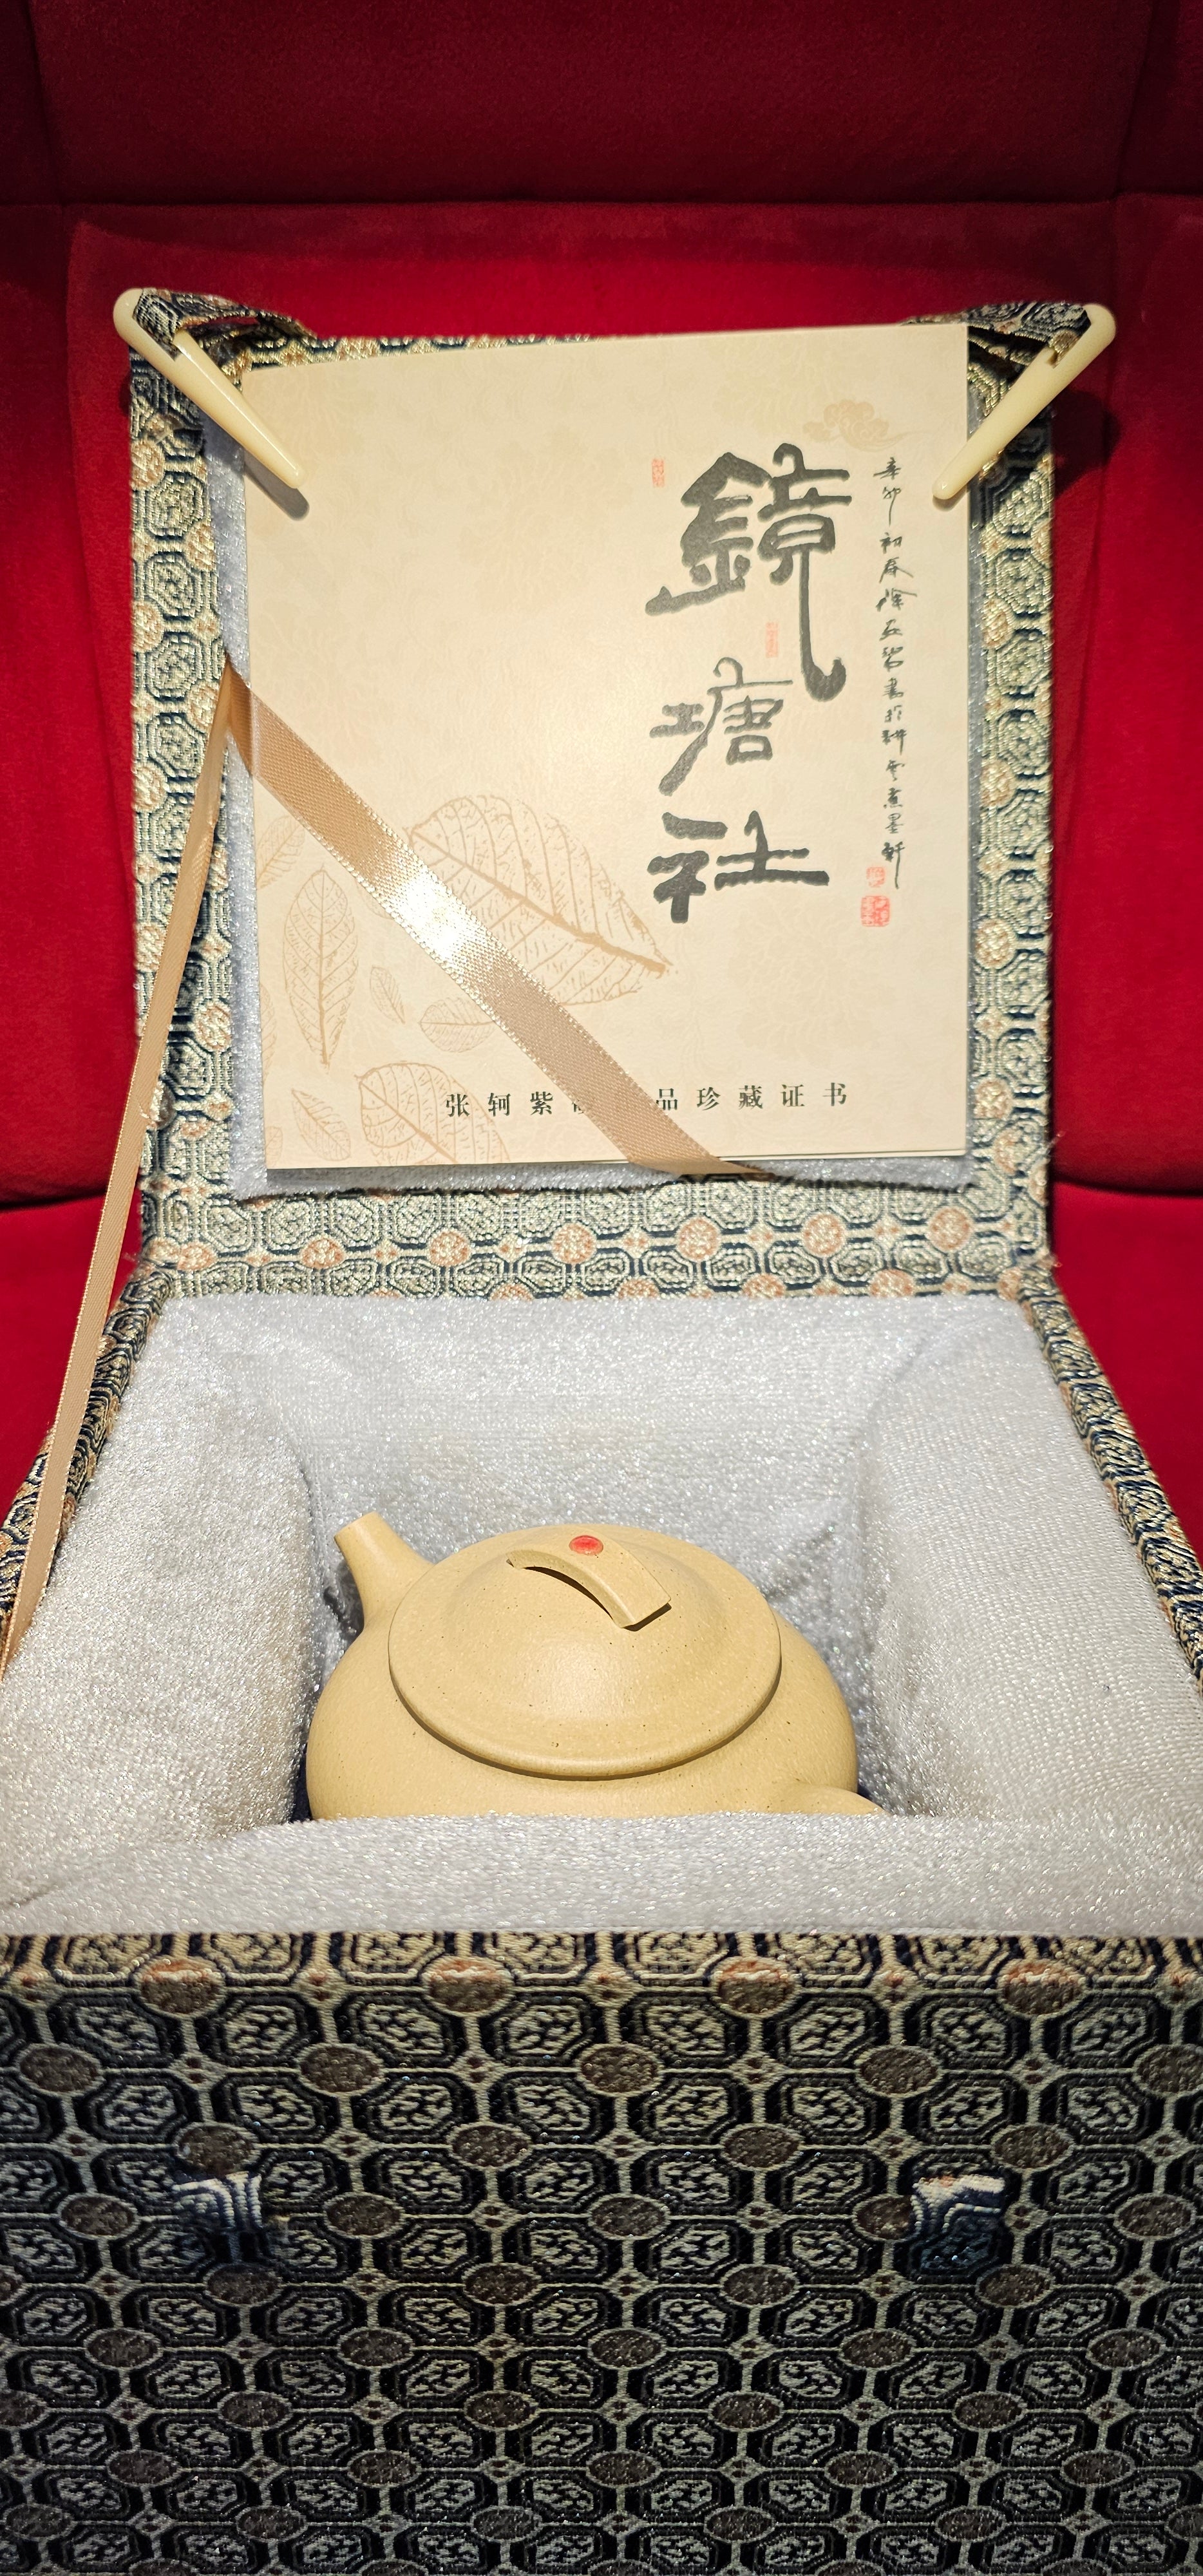 Yun Ying 云婴, 158ml, made with Cao Family's 100% BenShan LüNi 本山绿泥, crafted by L4 Assoc Master Artist Zhang Ke 助理工艺美术师, 张轲。